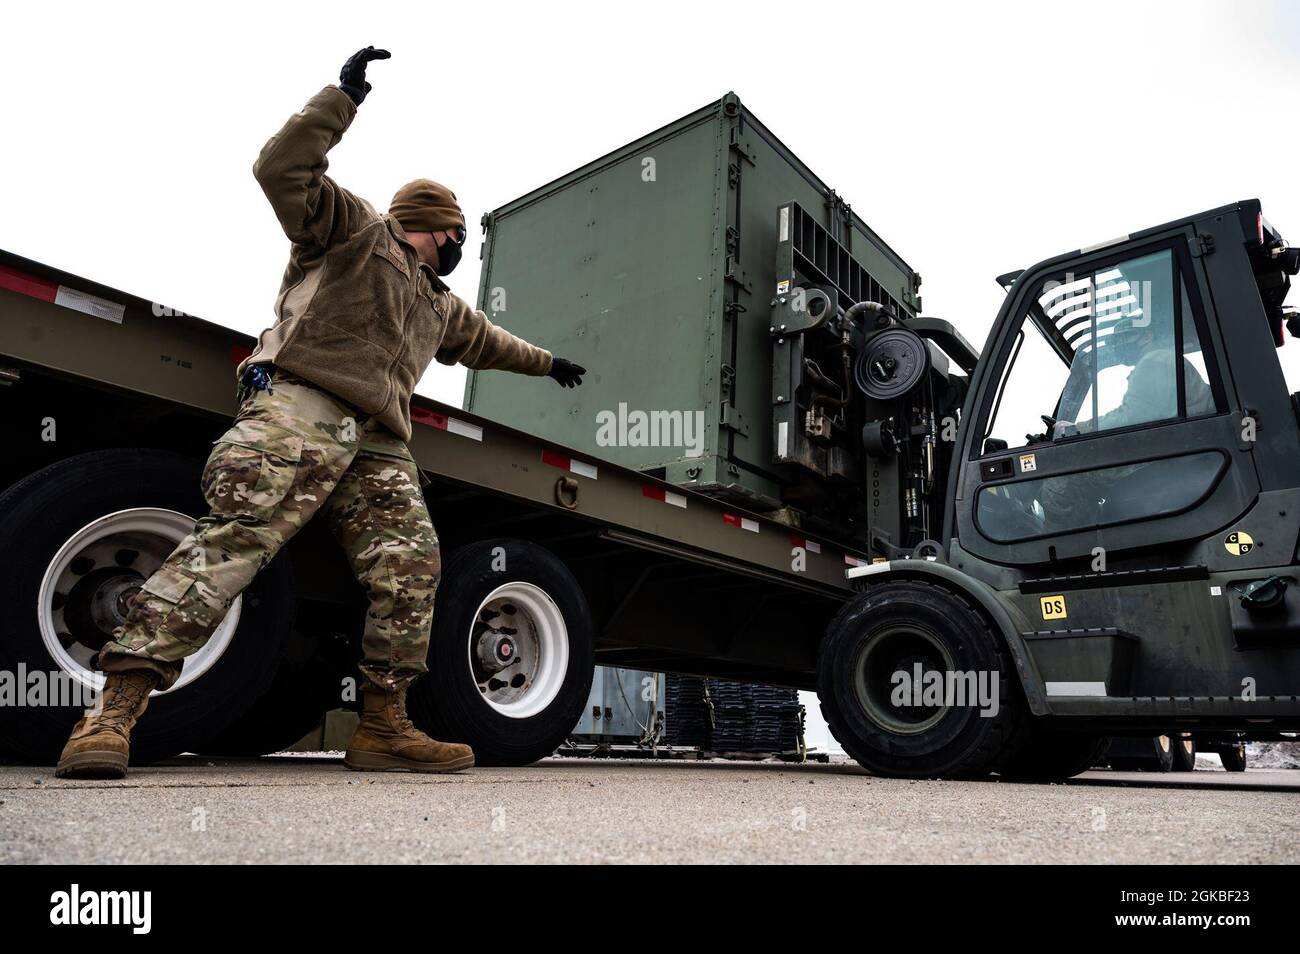 Staff Sgt. Timothy Shultz, 911th Logistics Readiness Squadron ground transportation specialist, directs Senior Airman Thomas Luther, 911th LRS ground transportation specialist, on how to position a conex box on a flatbed trailer while training at the Pittsburgh International Airport Air Reserve Station, Pennsylvania, March 4, 2021. The ground transportation specialists are training for situations they may encounter while deployed. Stock Photo